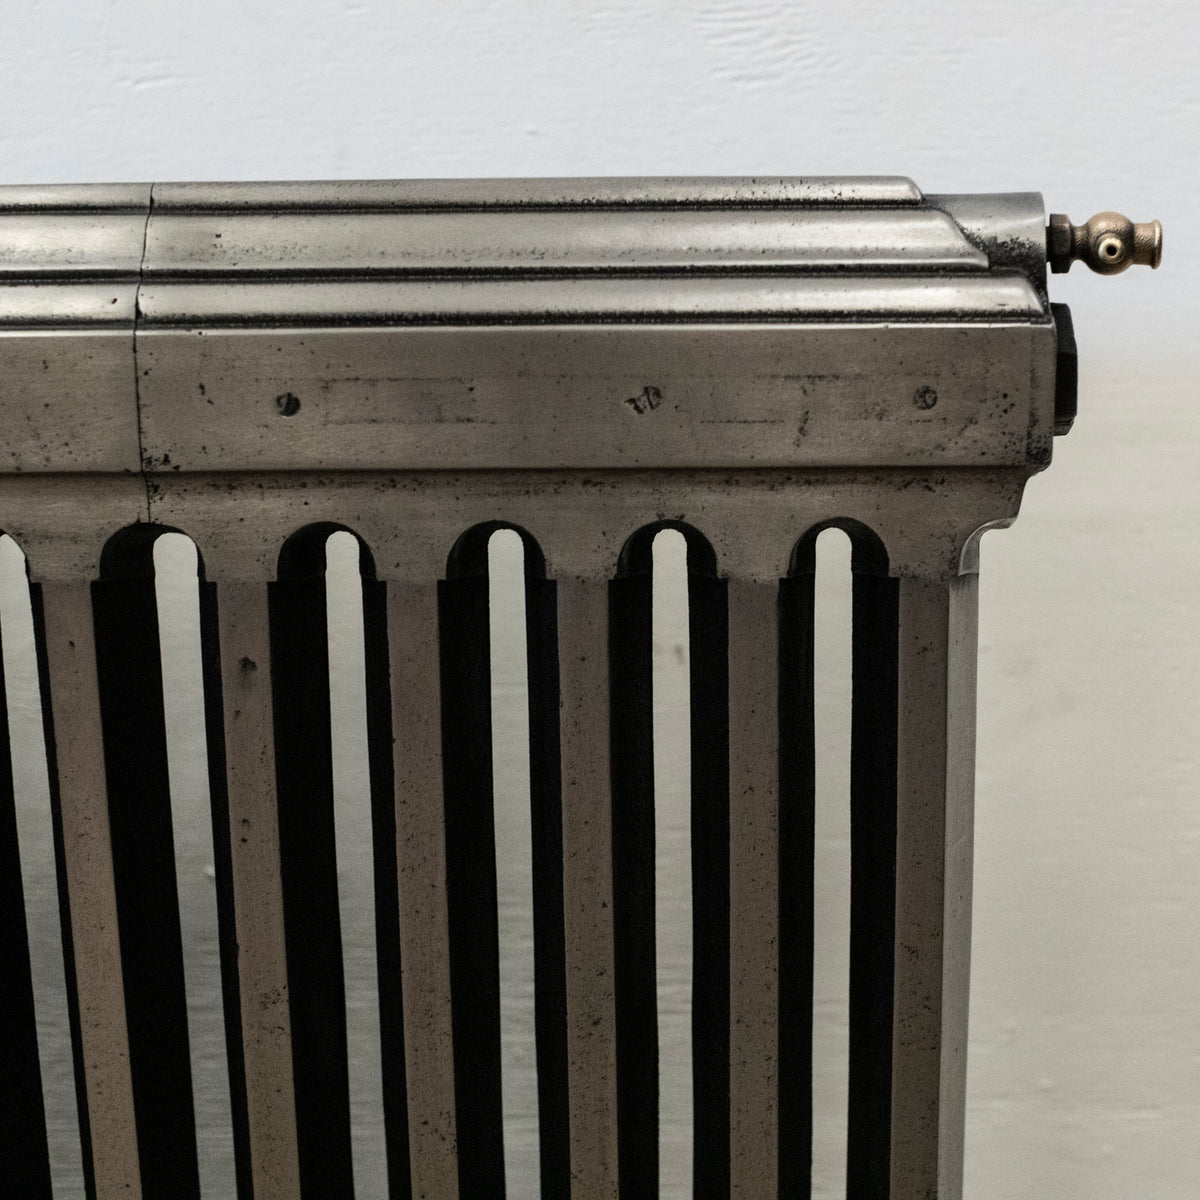 Antique Polished Cast Iron Radiator | Thames Bank Iron Co. | 4 Available | The Architectural Forum